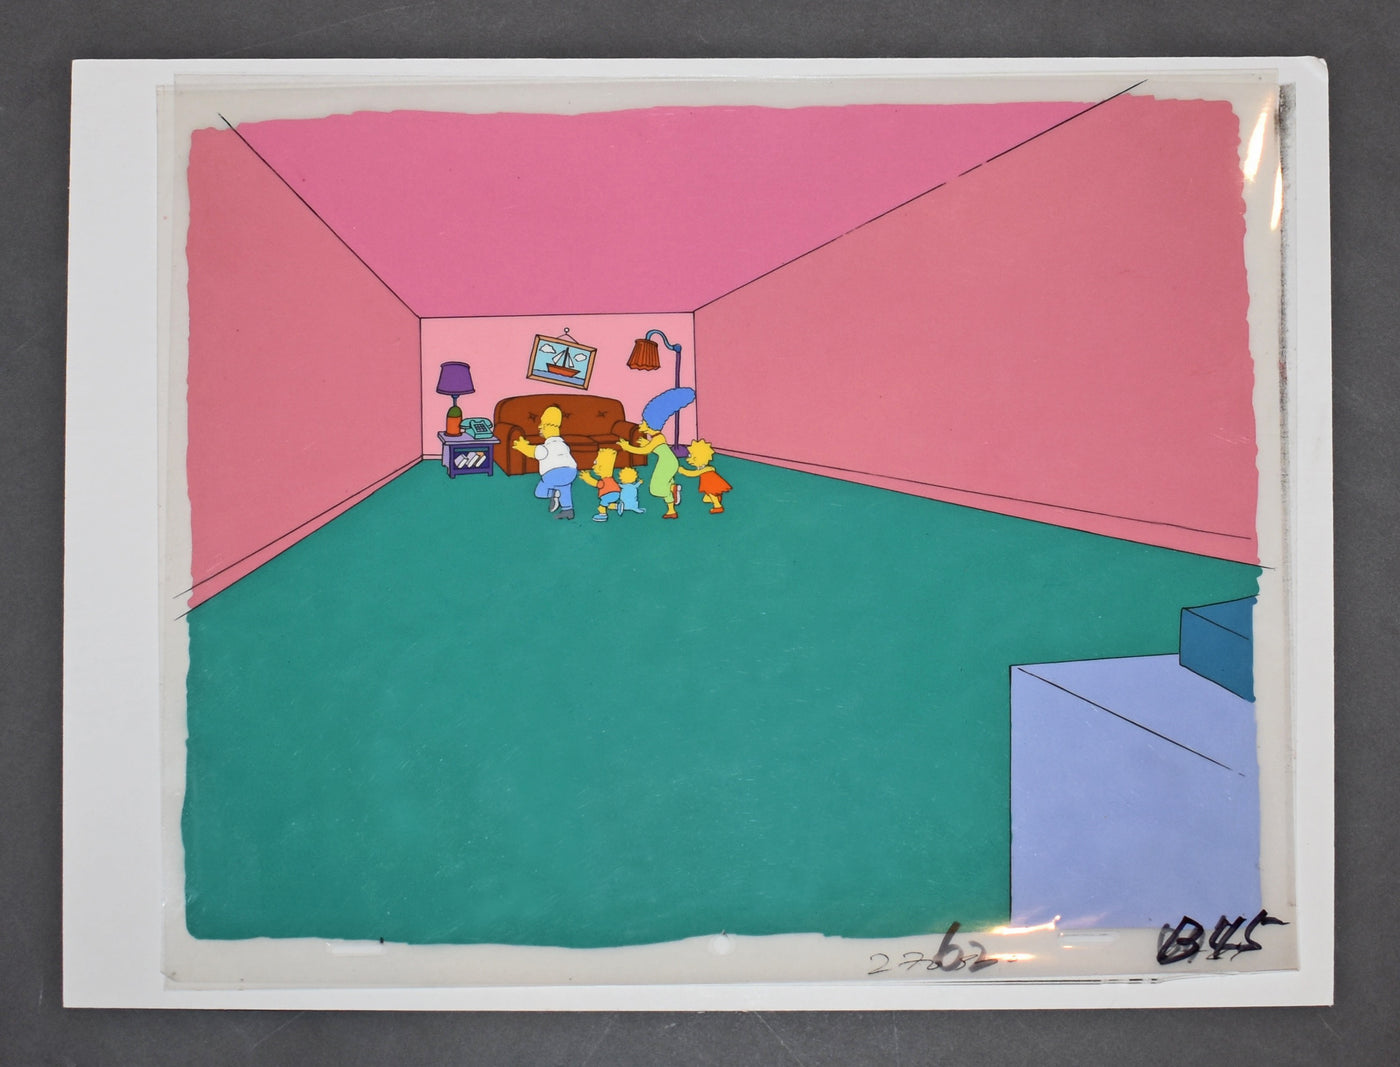 Original Simpsons Production Cel on Production Background from the Simpsons